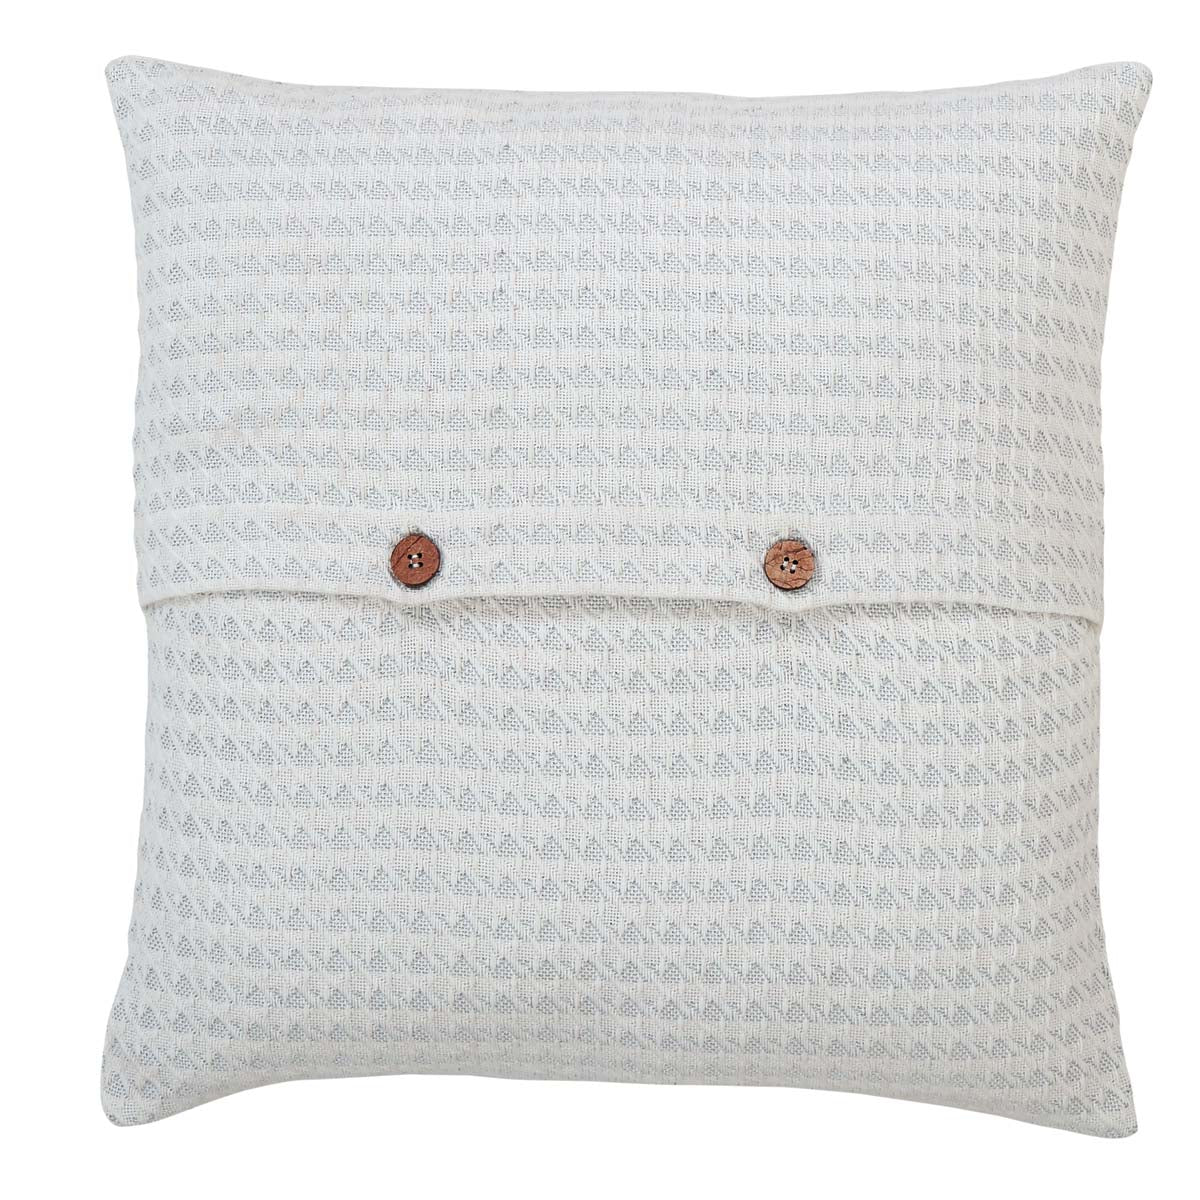 Arielle Seas and Greetings Pillow Cover 18x18 VHC Brands